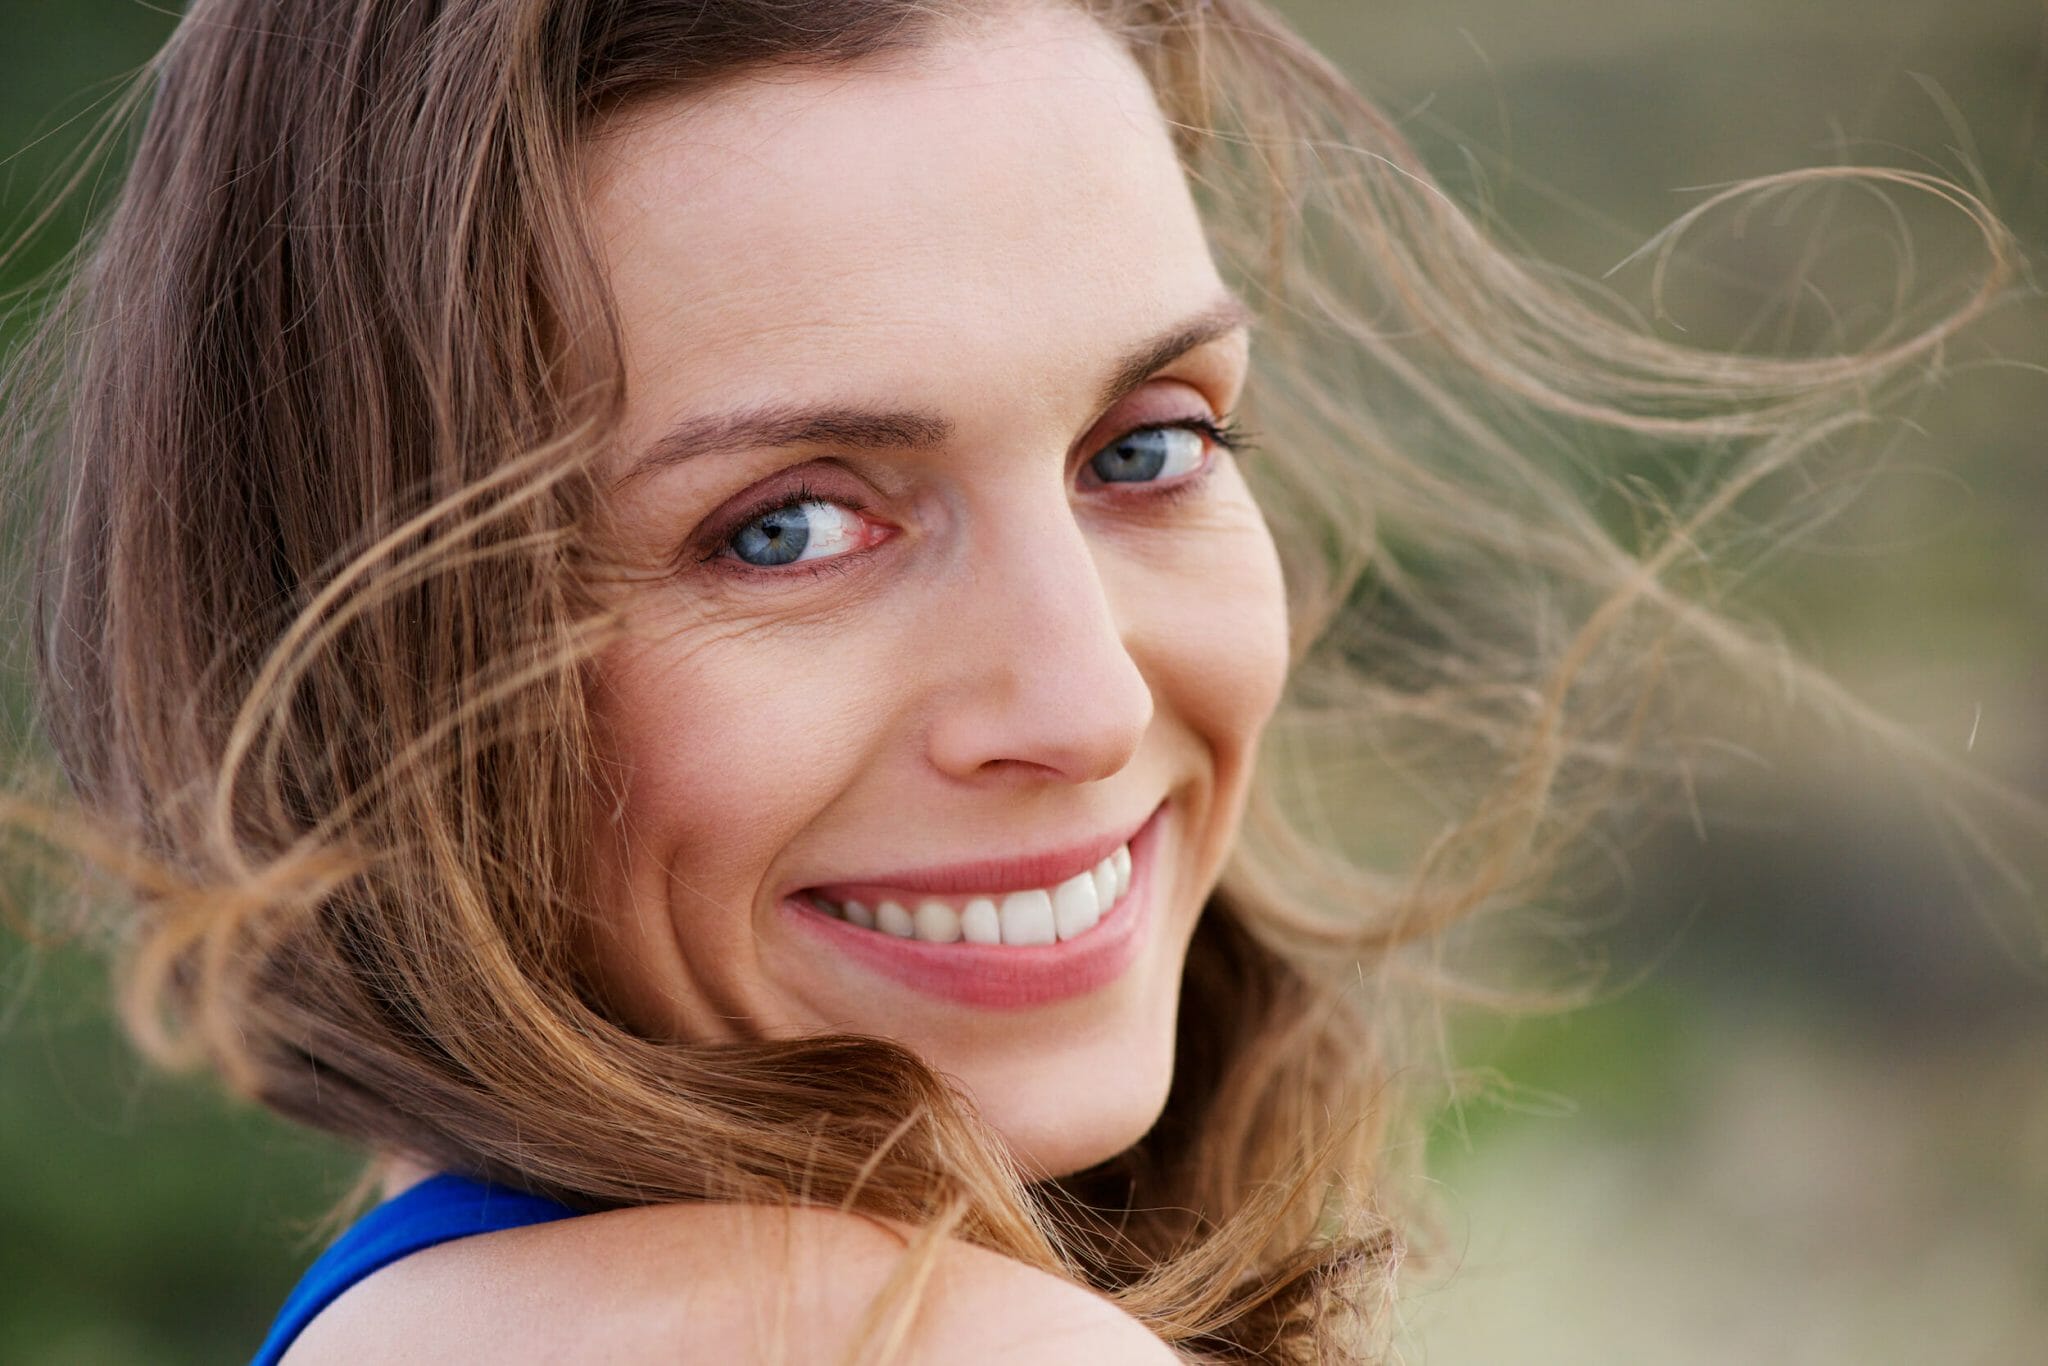 Healthy smiling woman ouatside